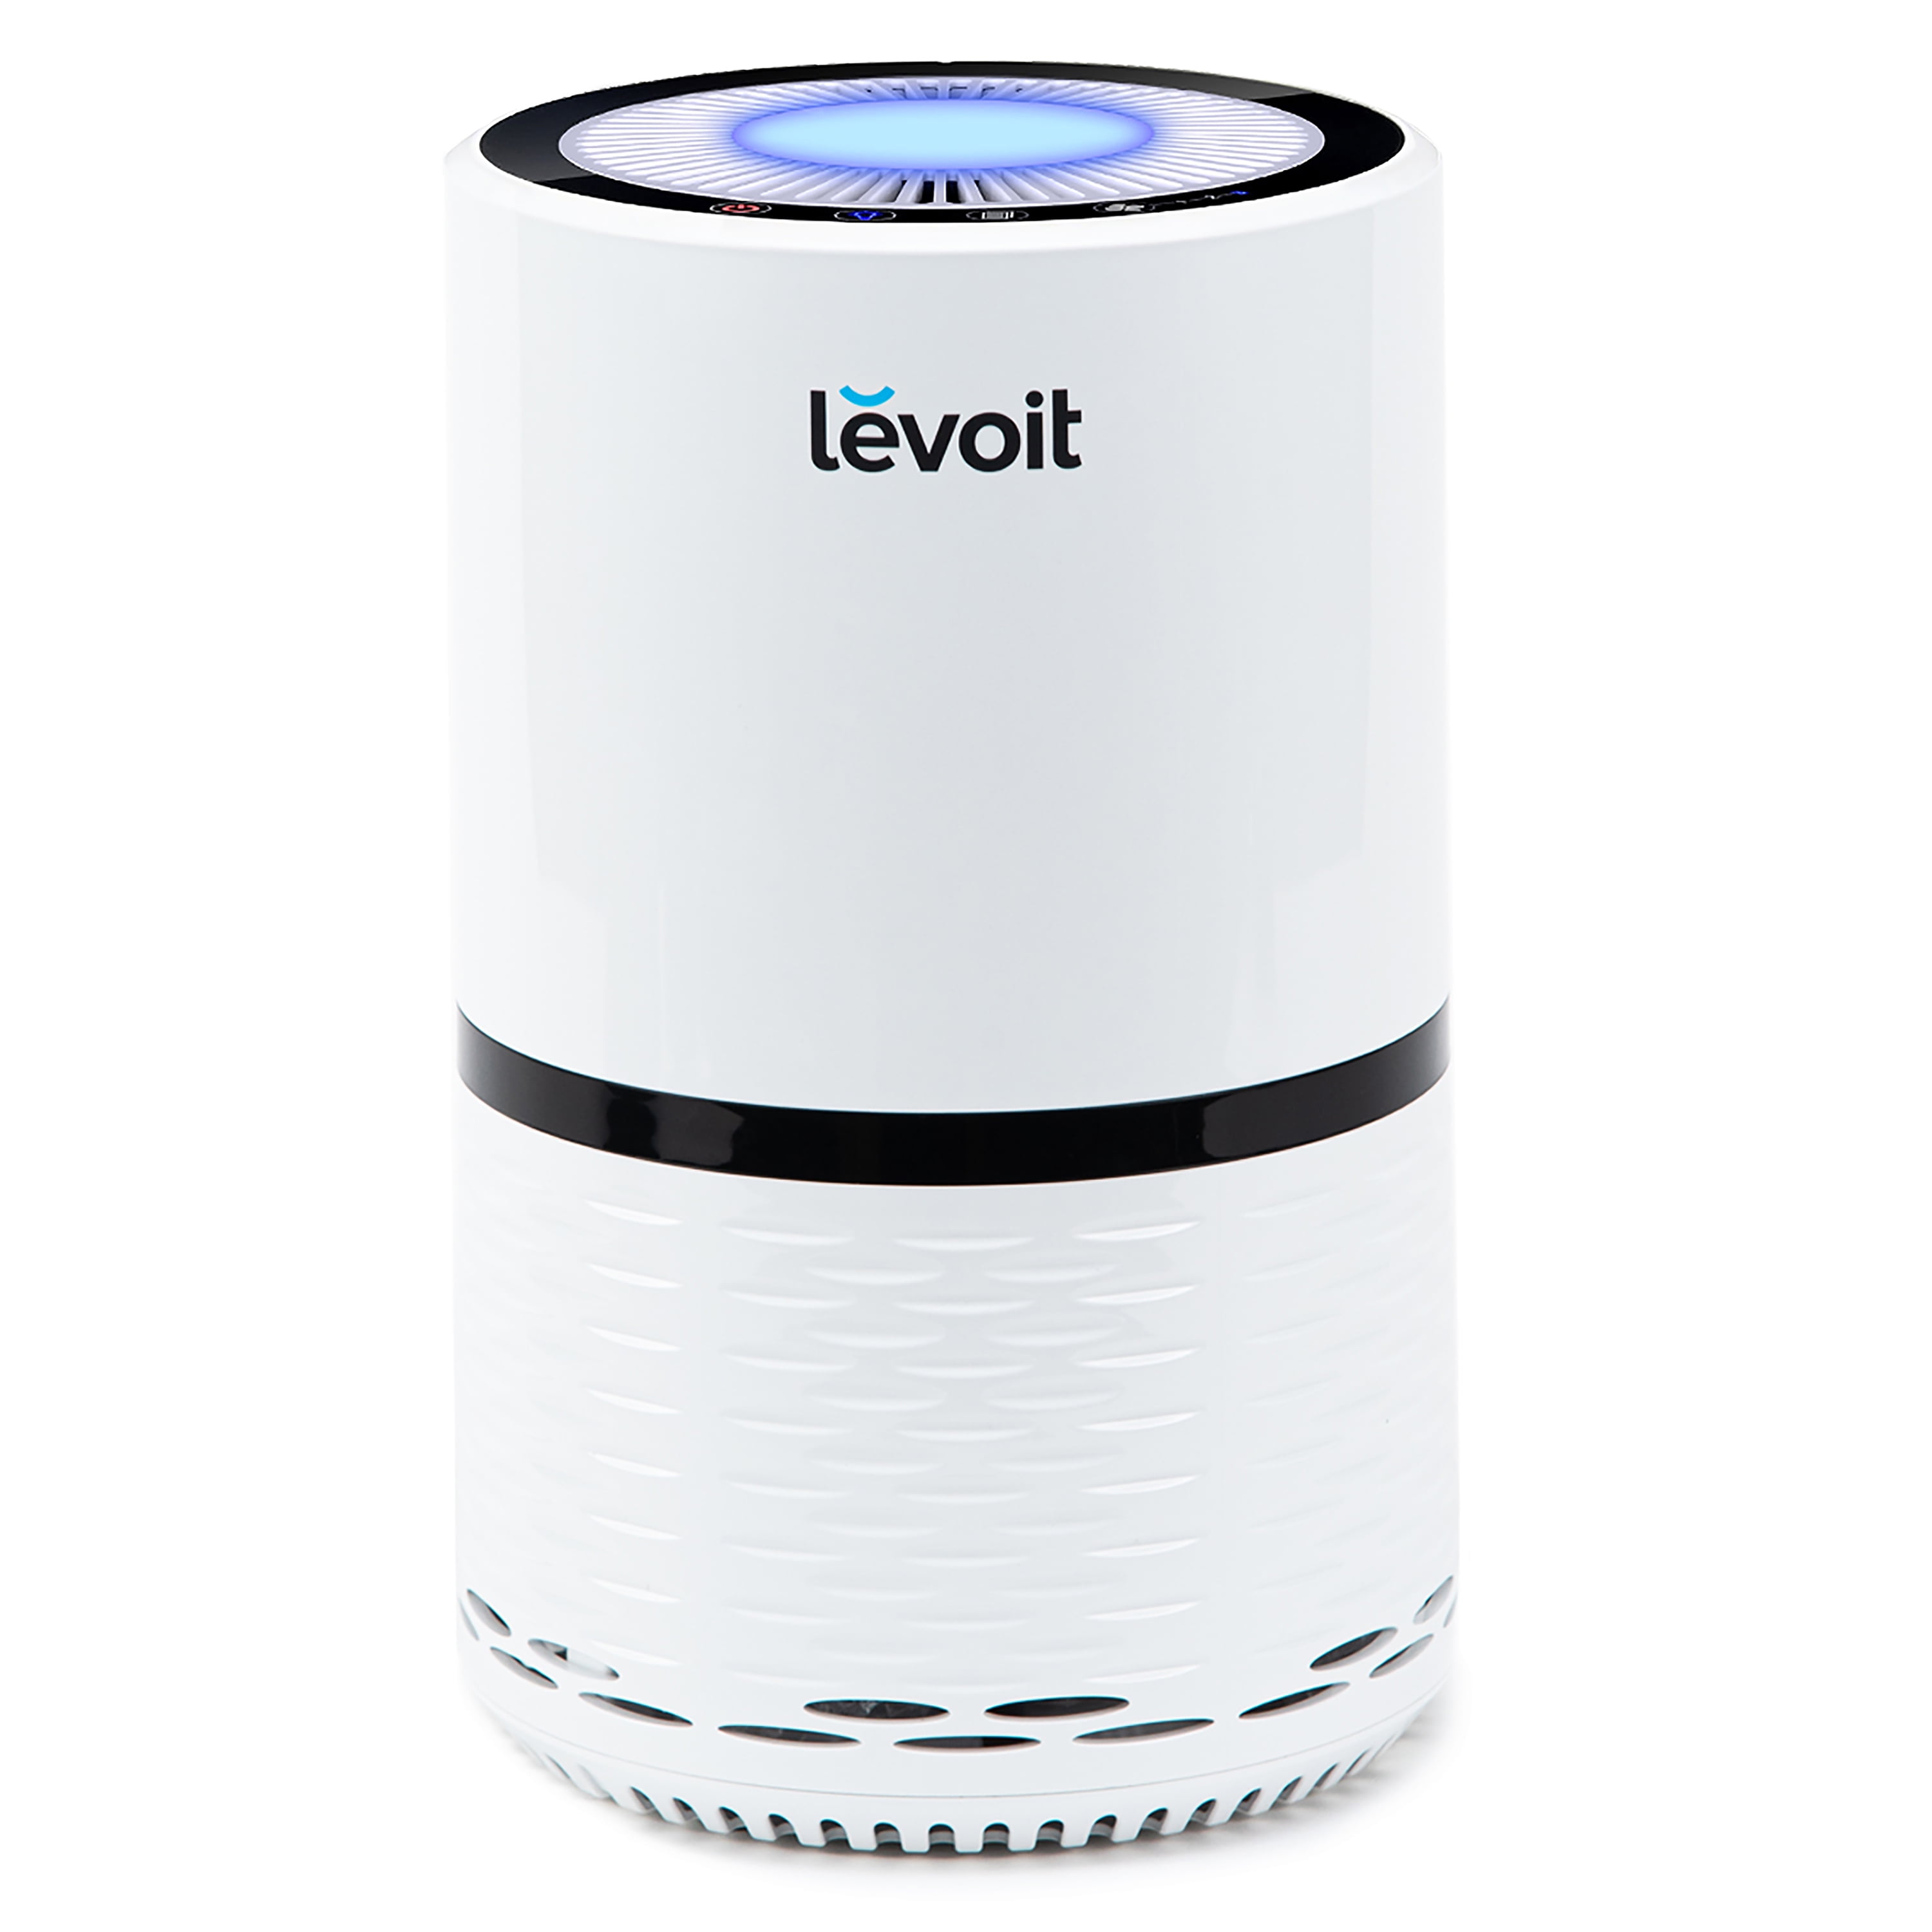 Levoit LV-H132 Air Purifier for Home True HEPA Filter **PREOWNED**  817915020869